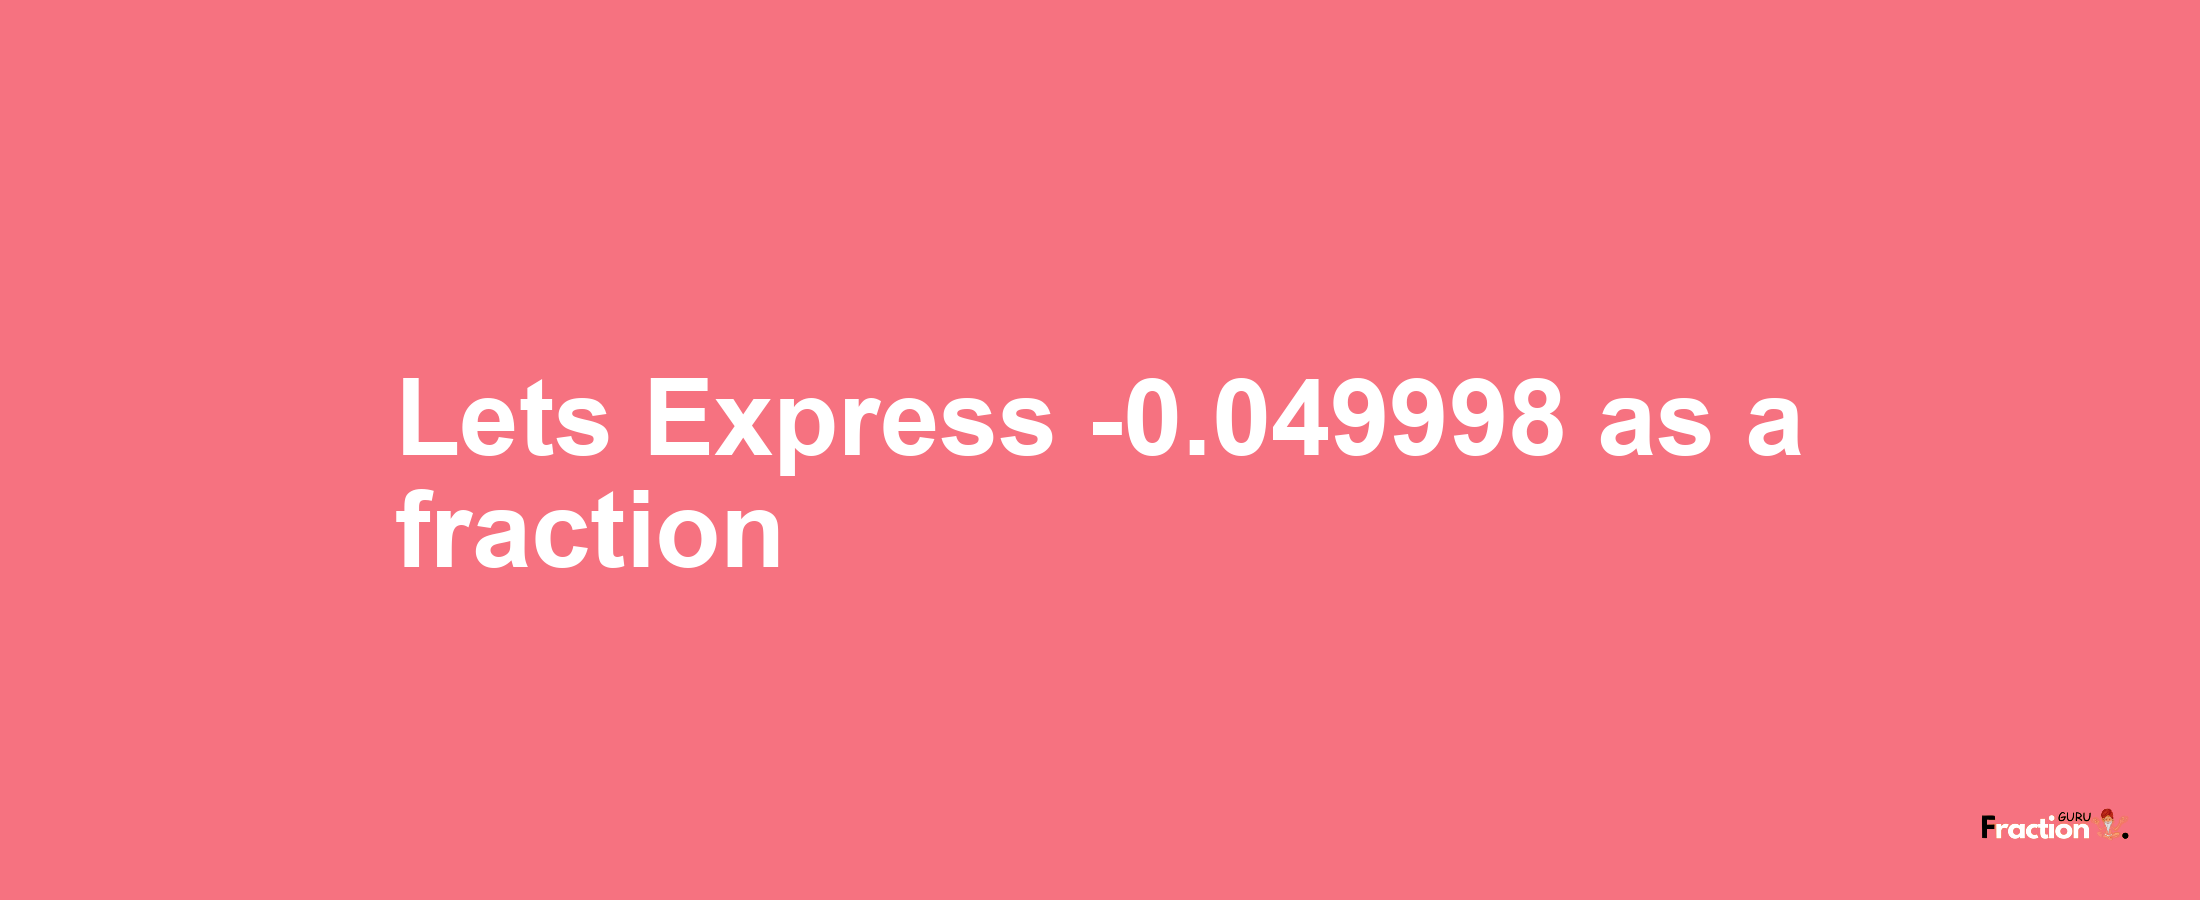 Lets Express -0.049998 as afraction